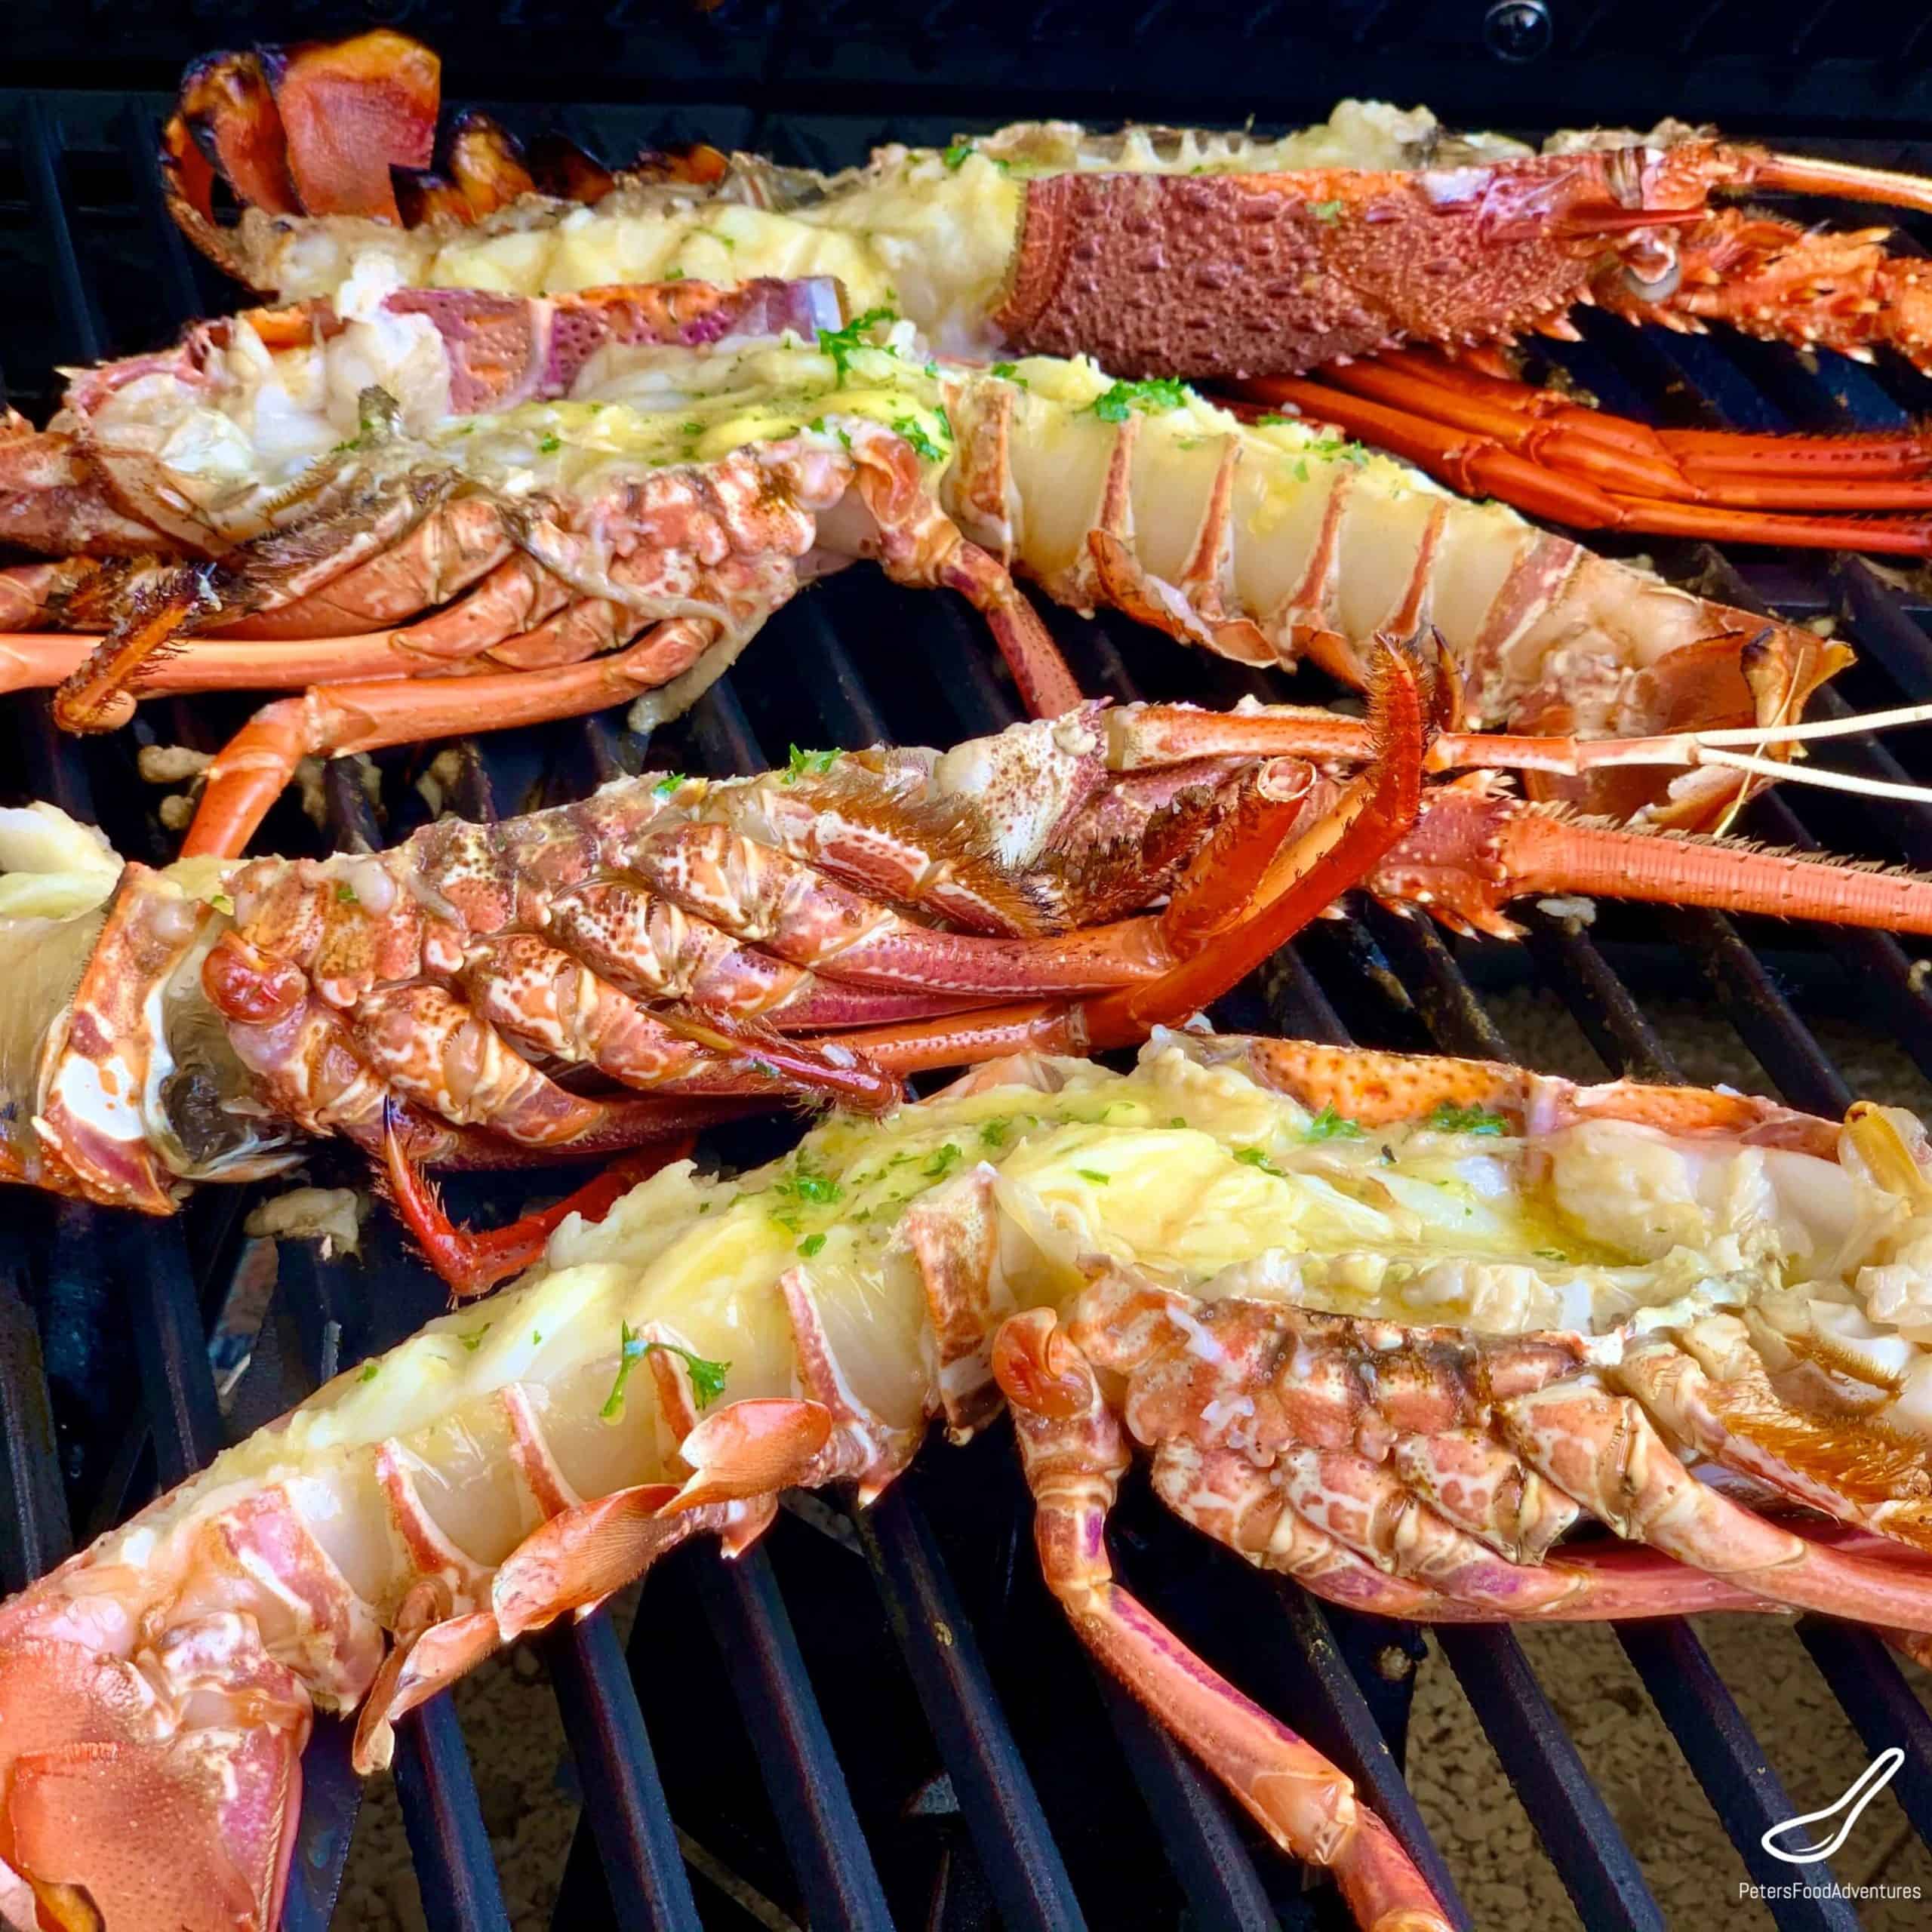 Grilling lobsters with garlic butter and parsley